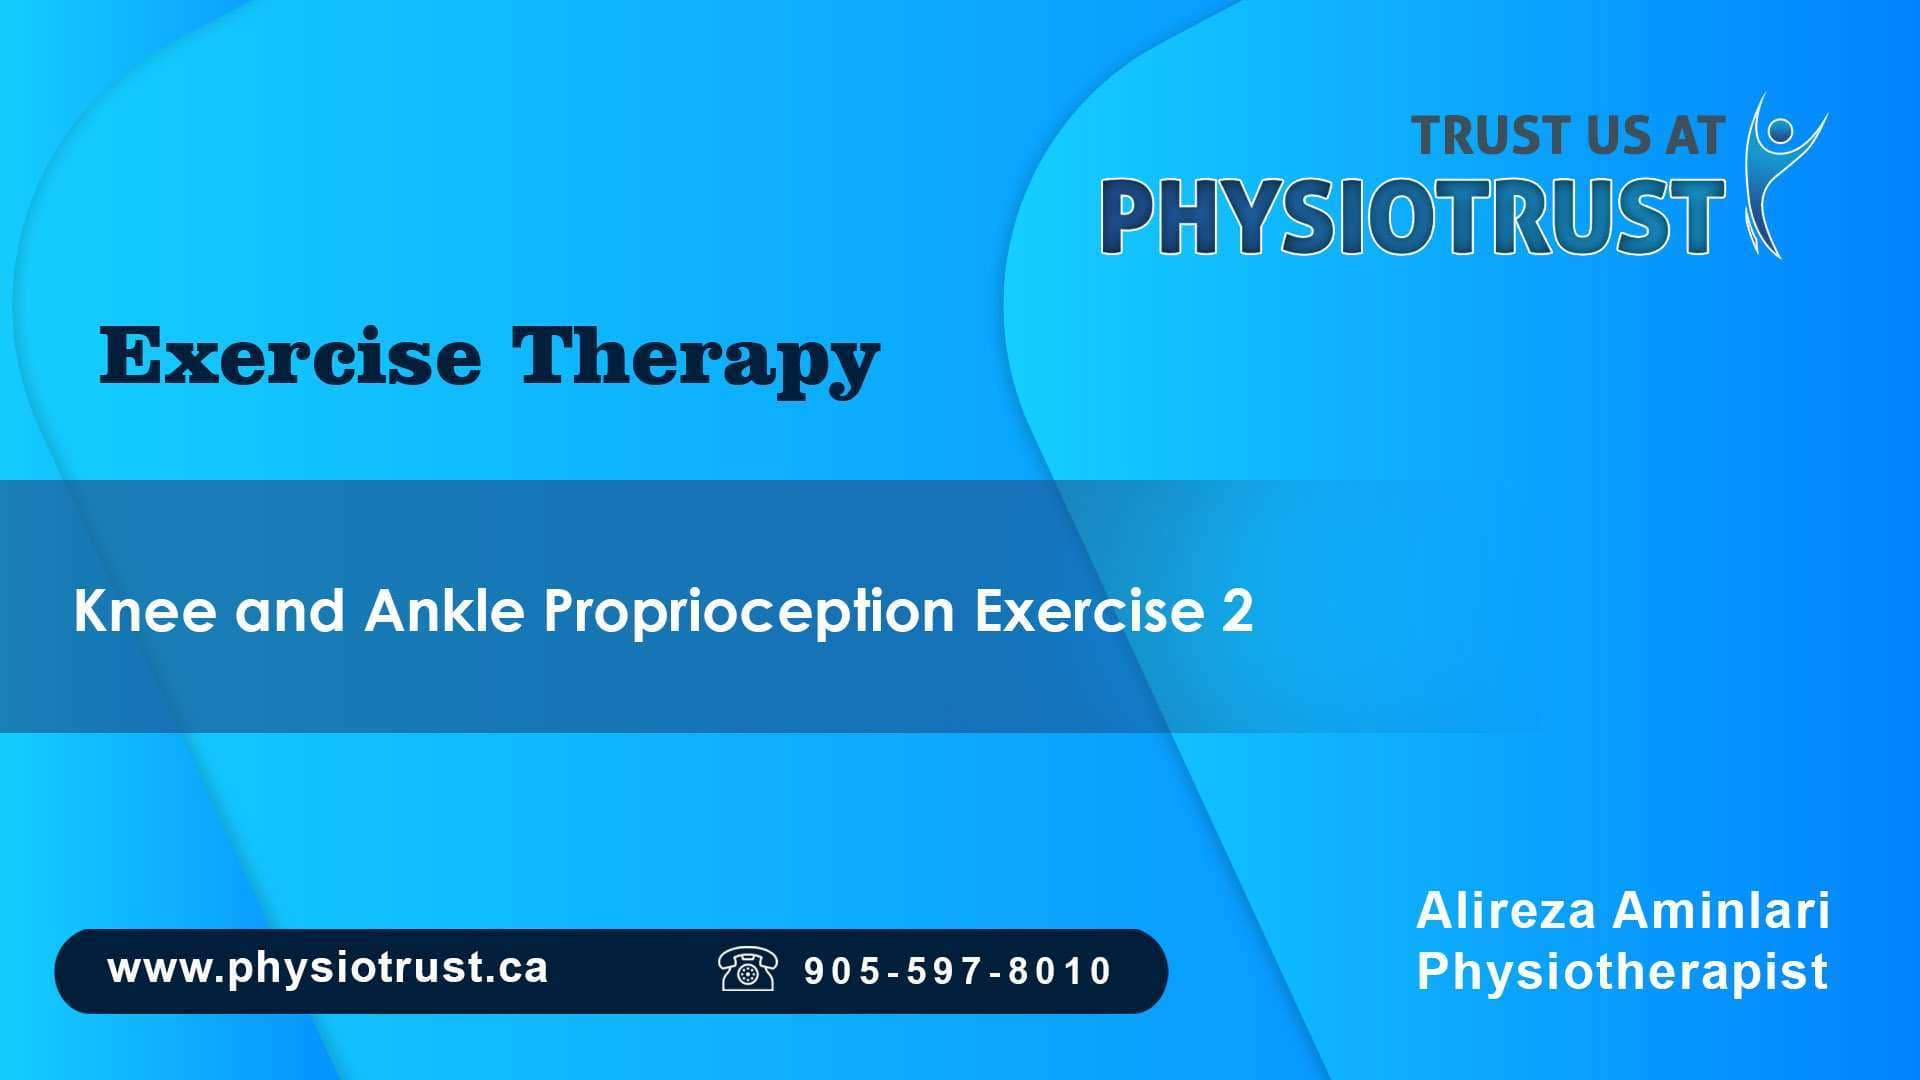 Knee and Ankle Proprioception Exercise 2